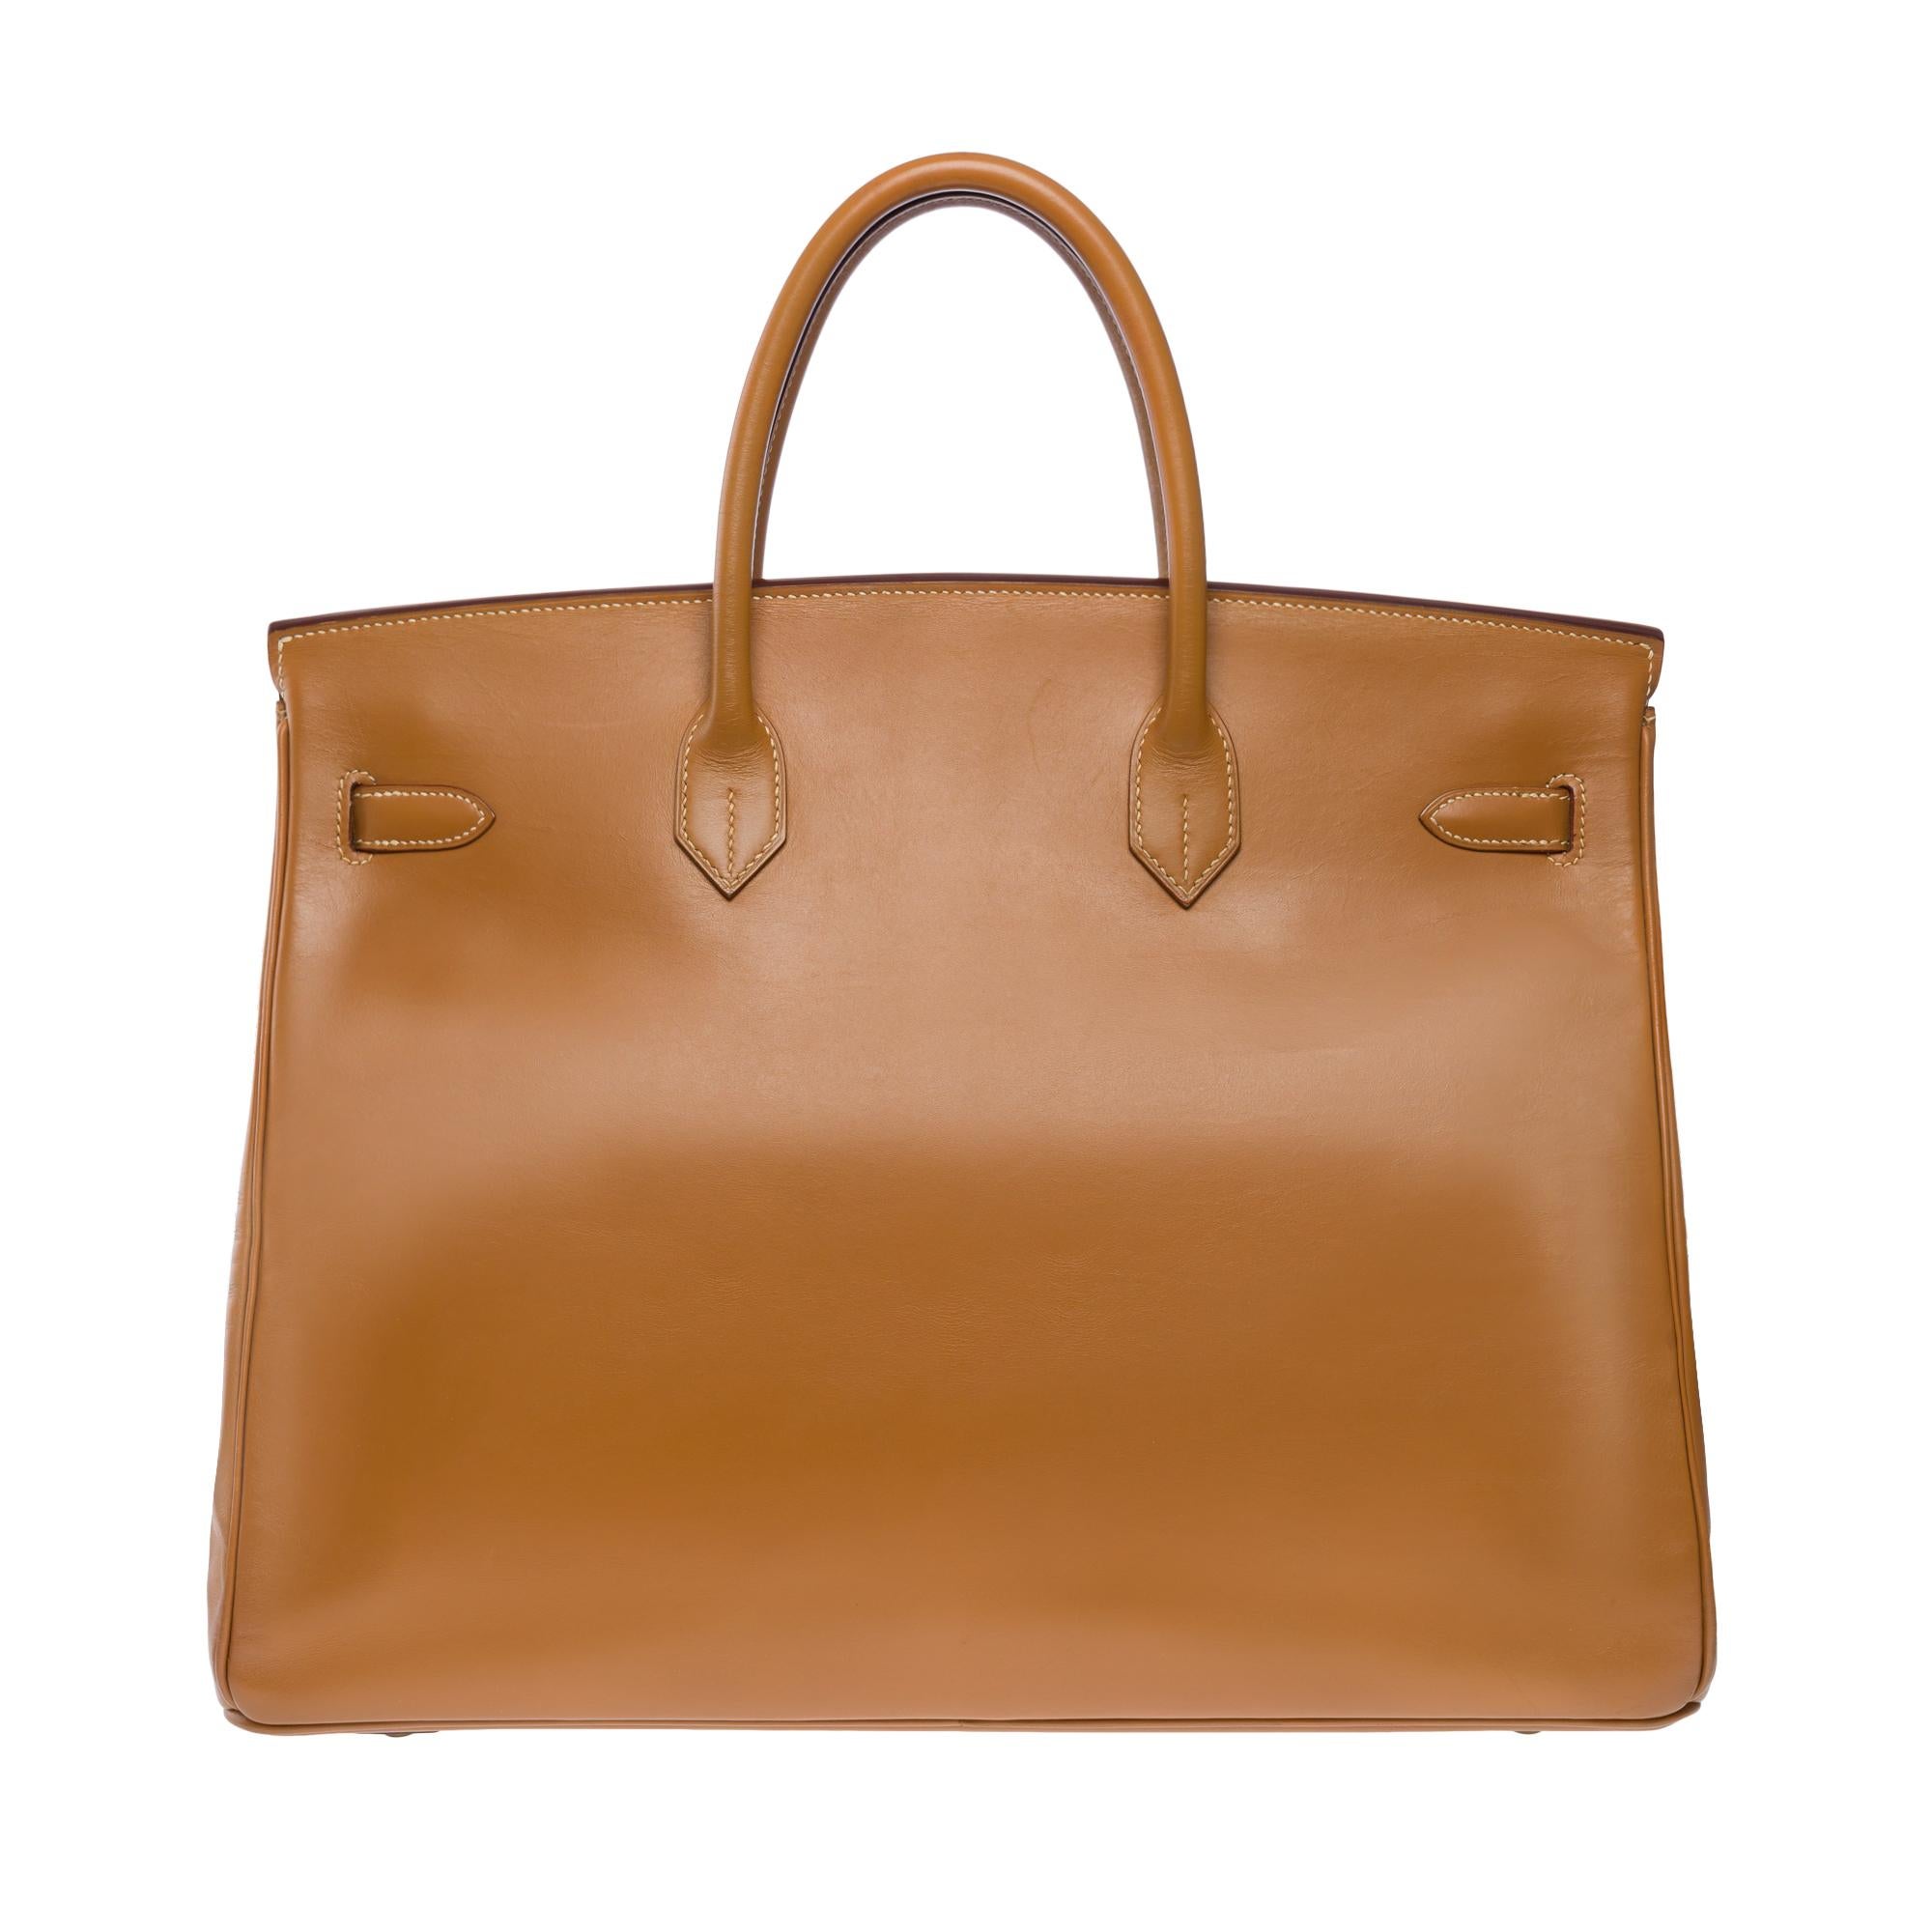 Beautiful Hermès Birkin 40 handbag in Camel (Gold) Chamonix leather, , gold plated metal hardware, double handle in camel leather for a hand carry

Flap closure
Inner lining in gold leather, one zippered pocket, one patch pocket
Signature: 